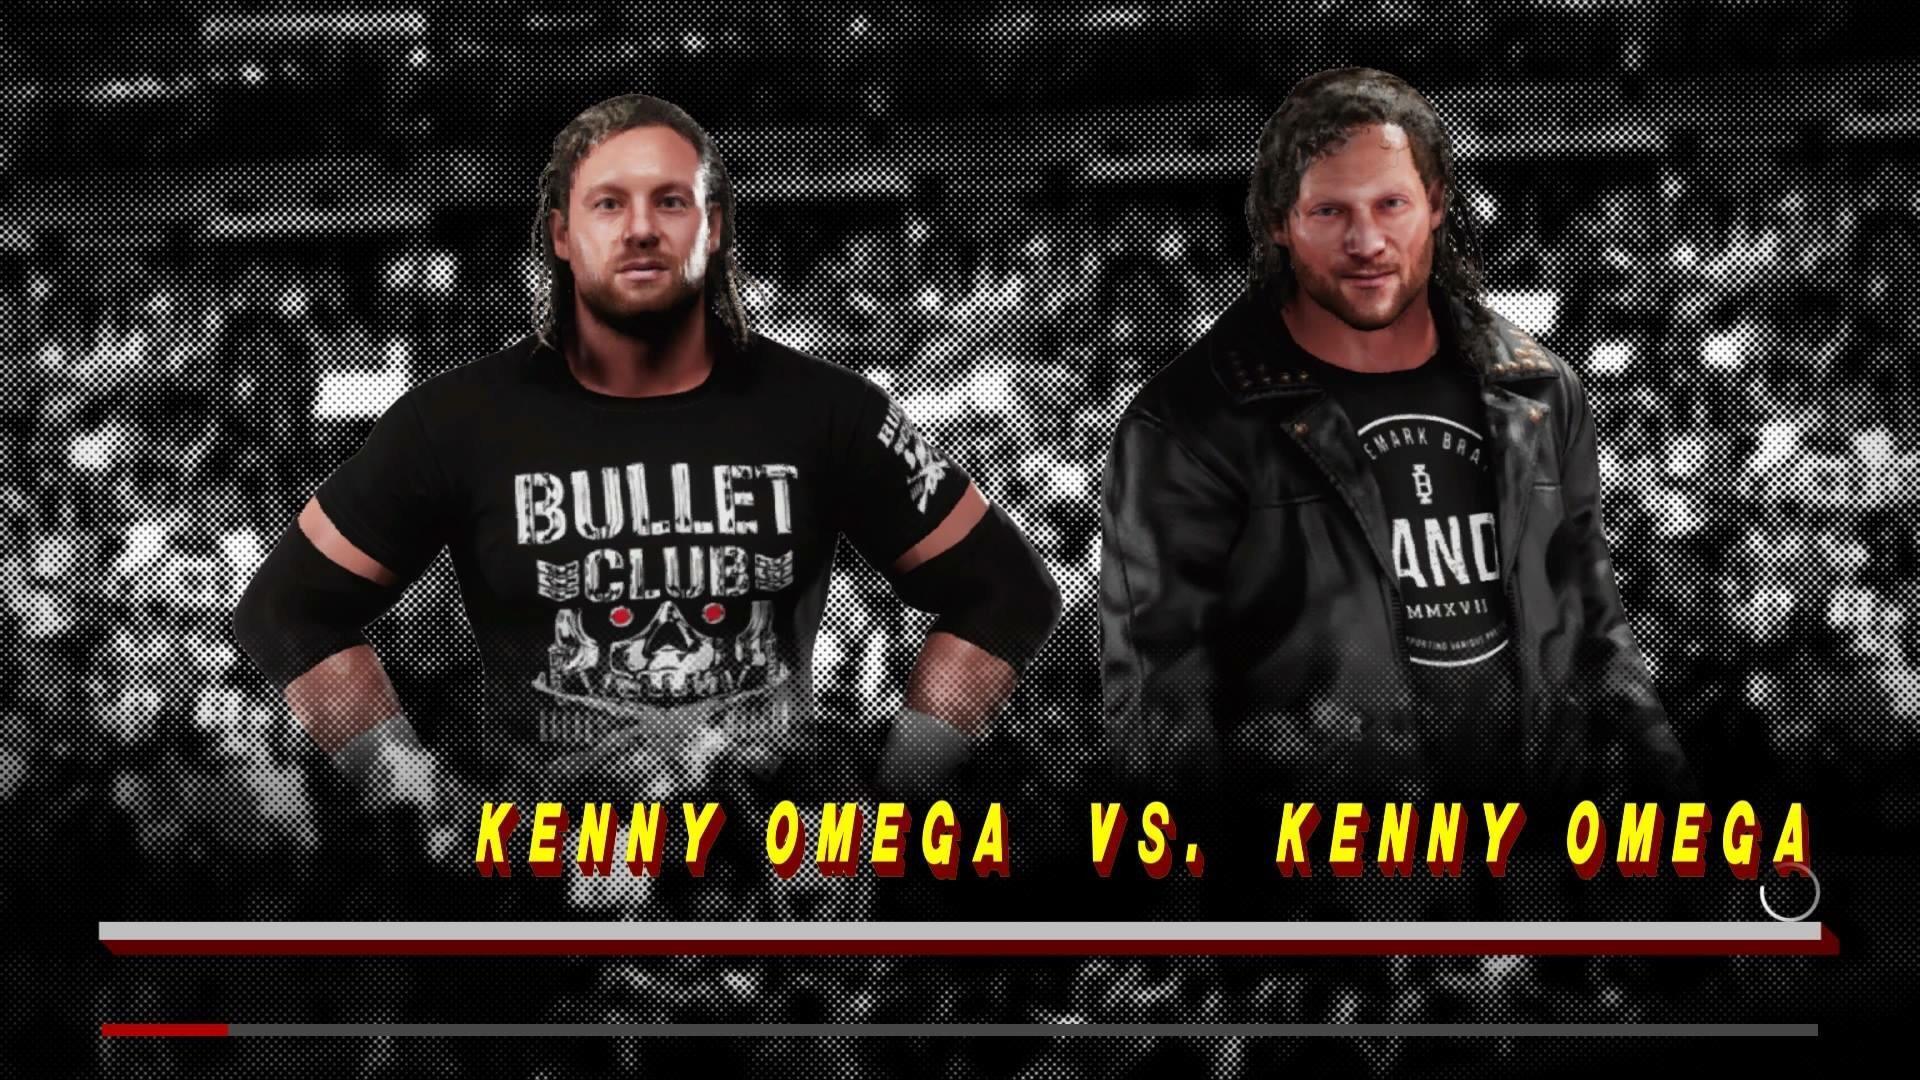 Decision time and I need help: which Kenny Omega should I